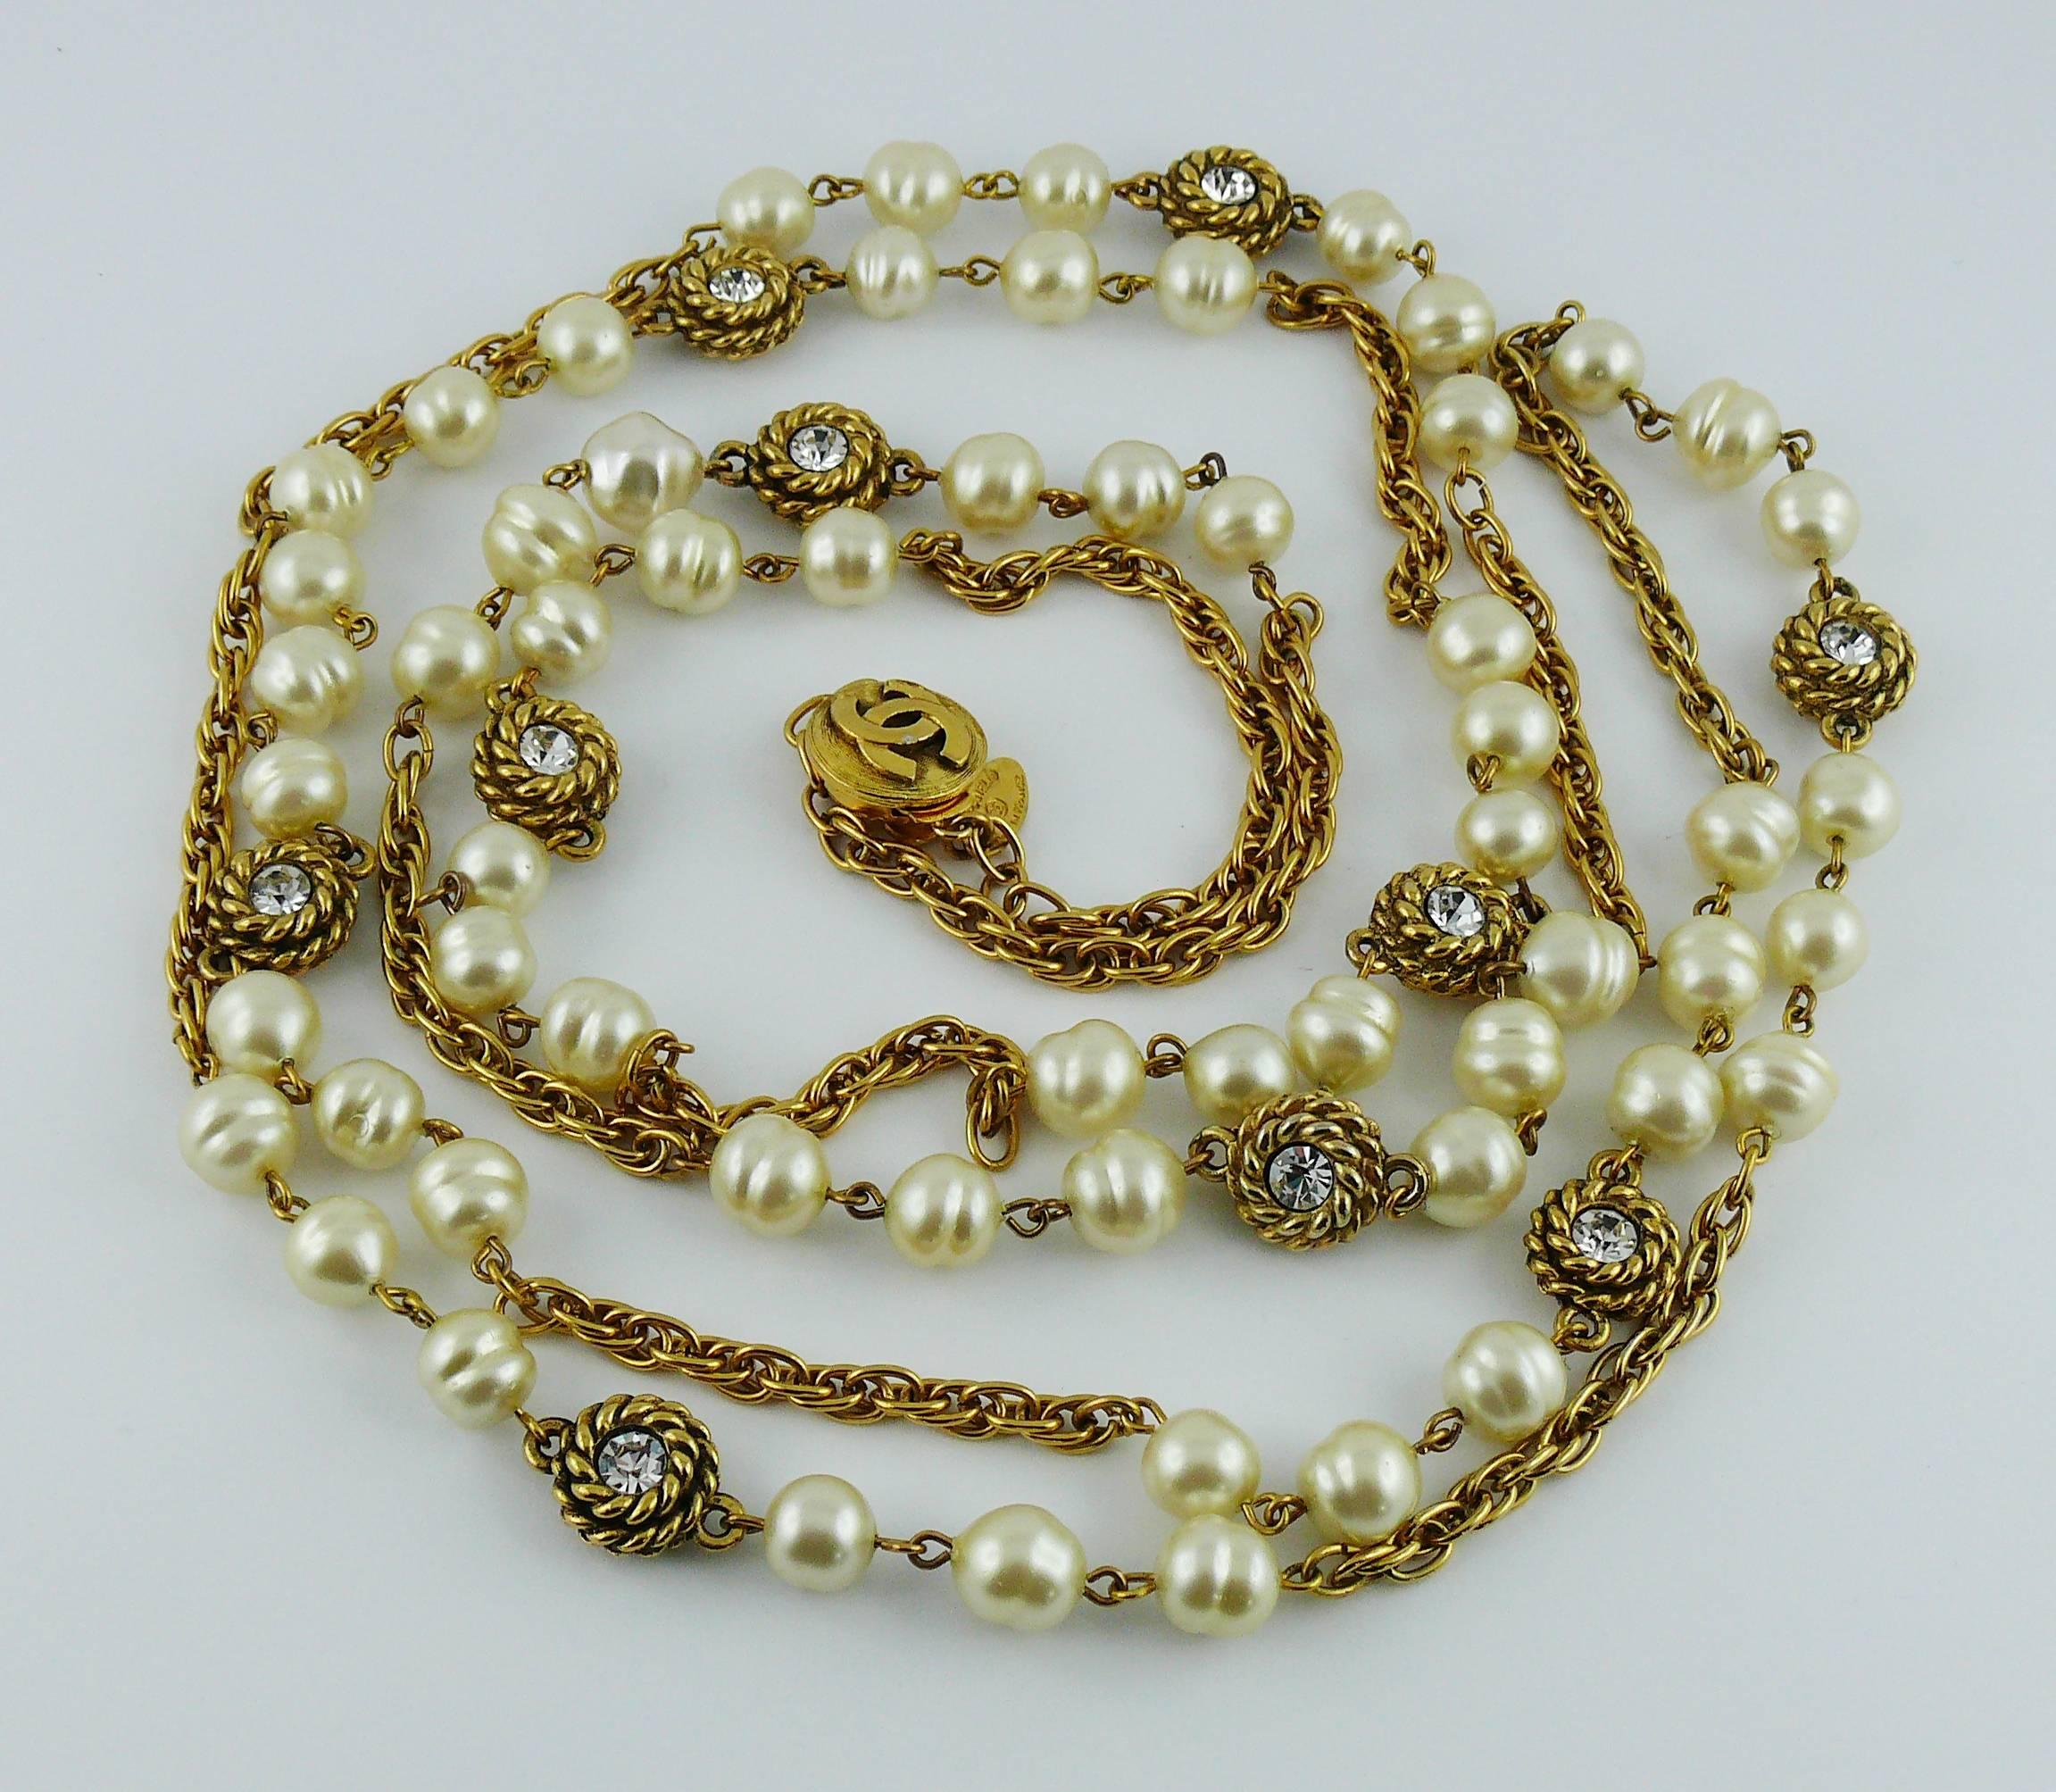 CHANEL vintage 1980s classic sautoir necklace featuring glass faux pearls, rope like links with crystal embellishement, gold tone chain.

Secure clasp with CC monogram.

Embossed CHANEL Made in France on oval tag.

Indicative measurements : total